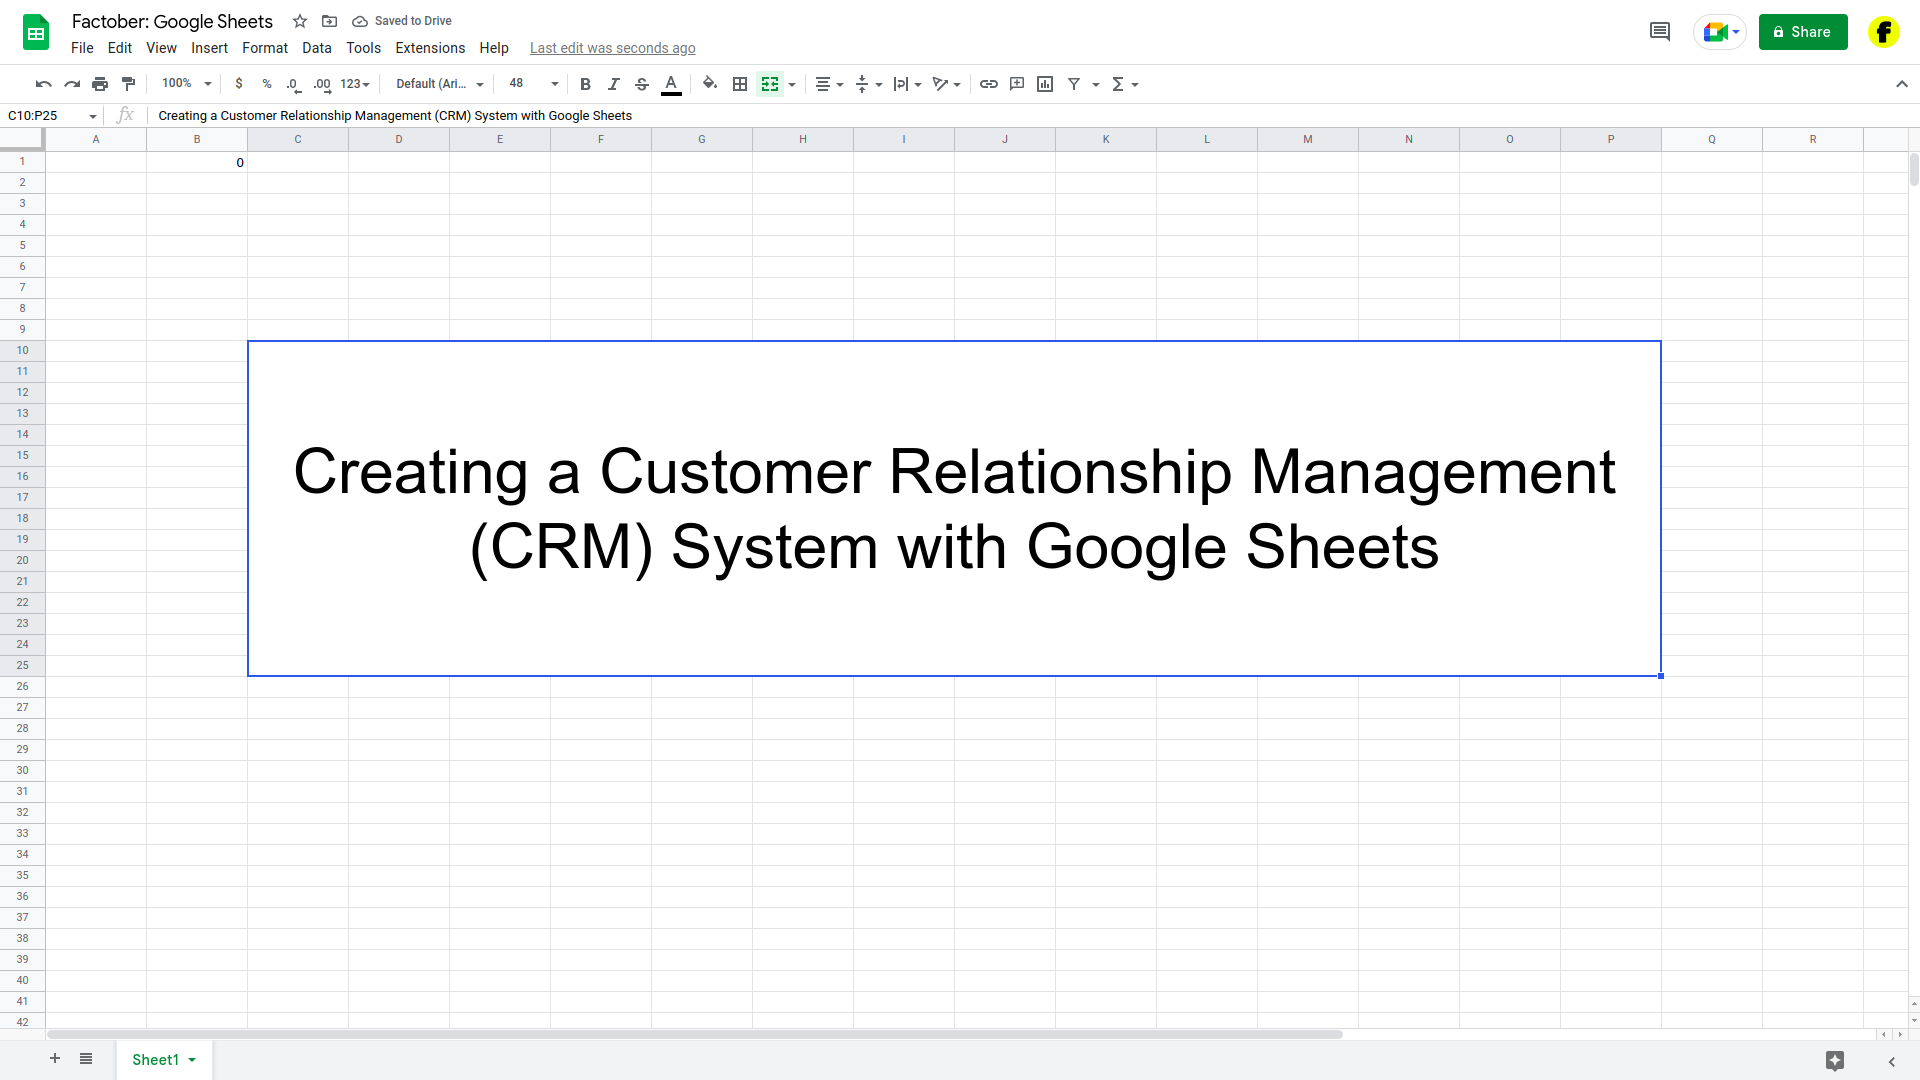 Creating a Customer Relationship Management (CRM) System with Google Sheets